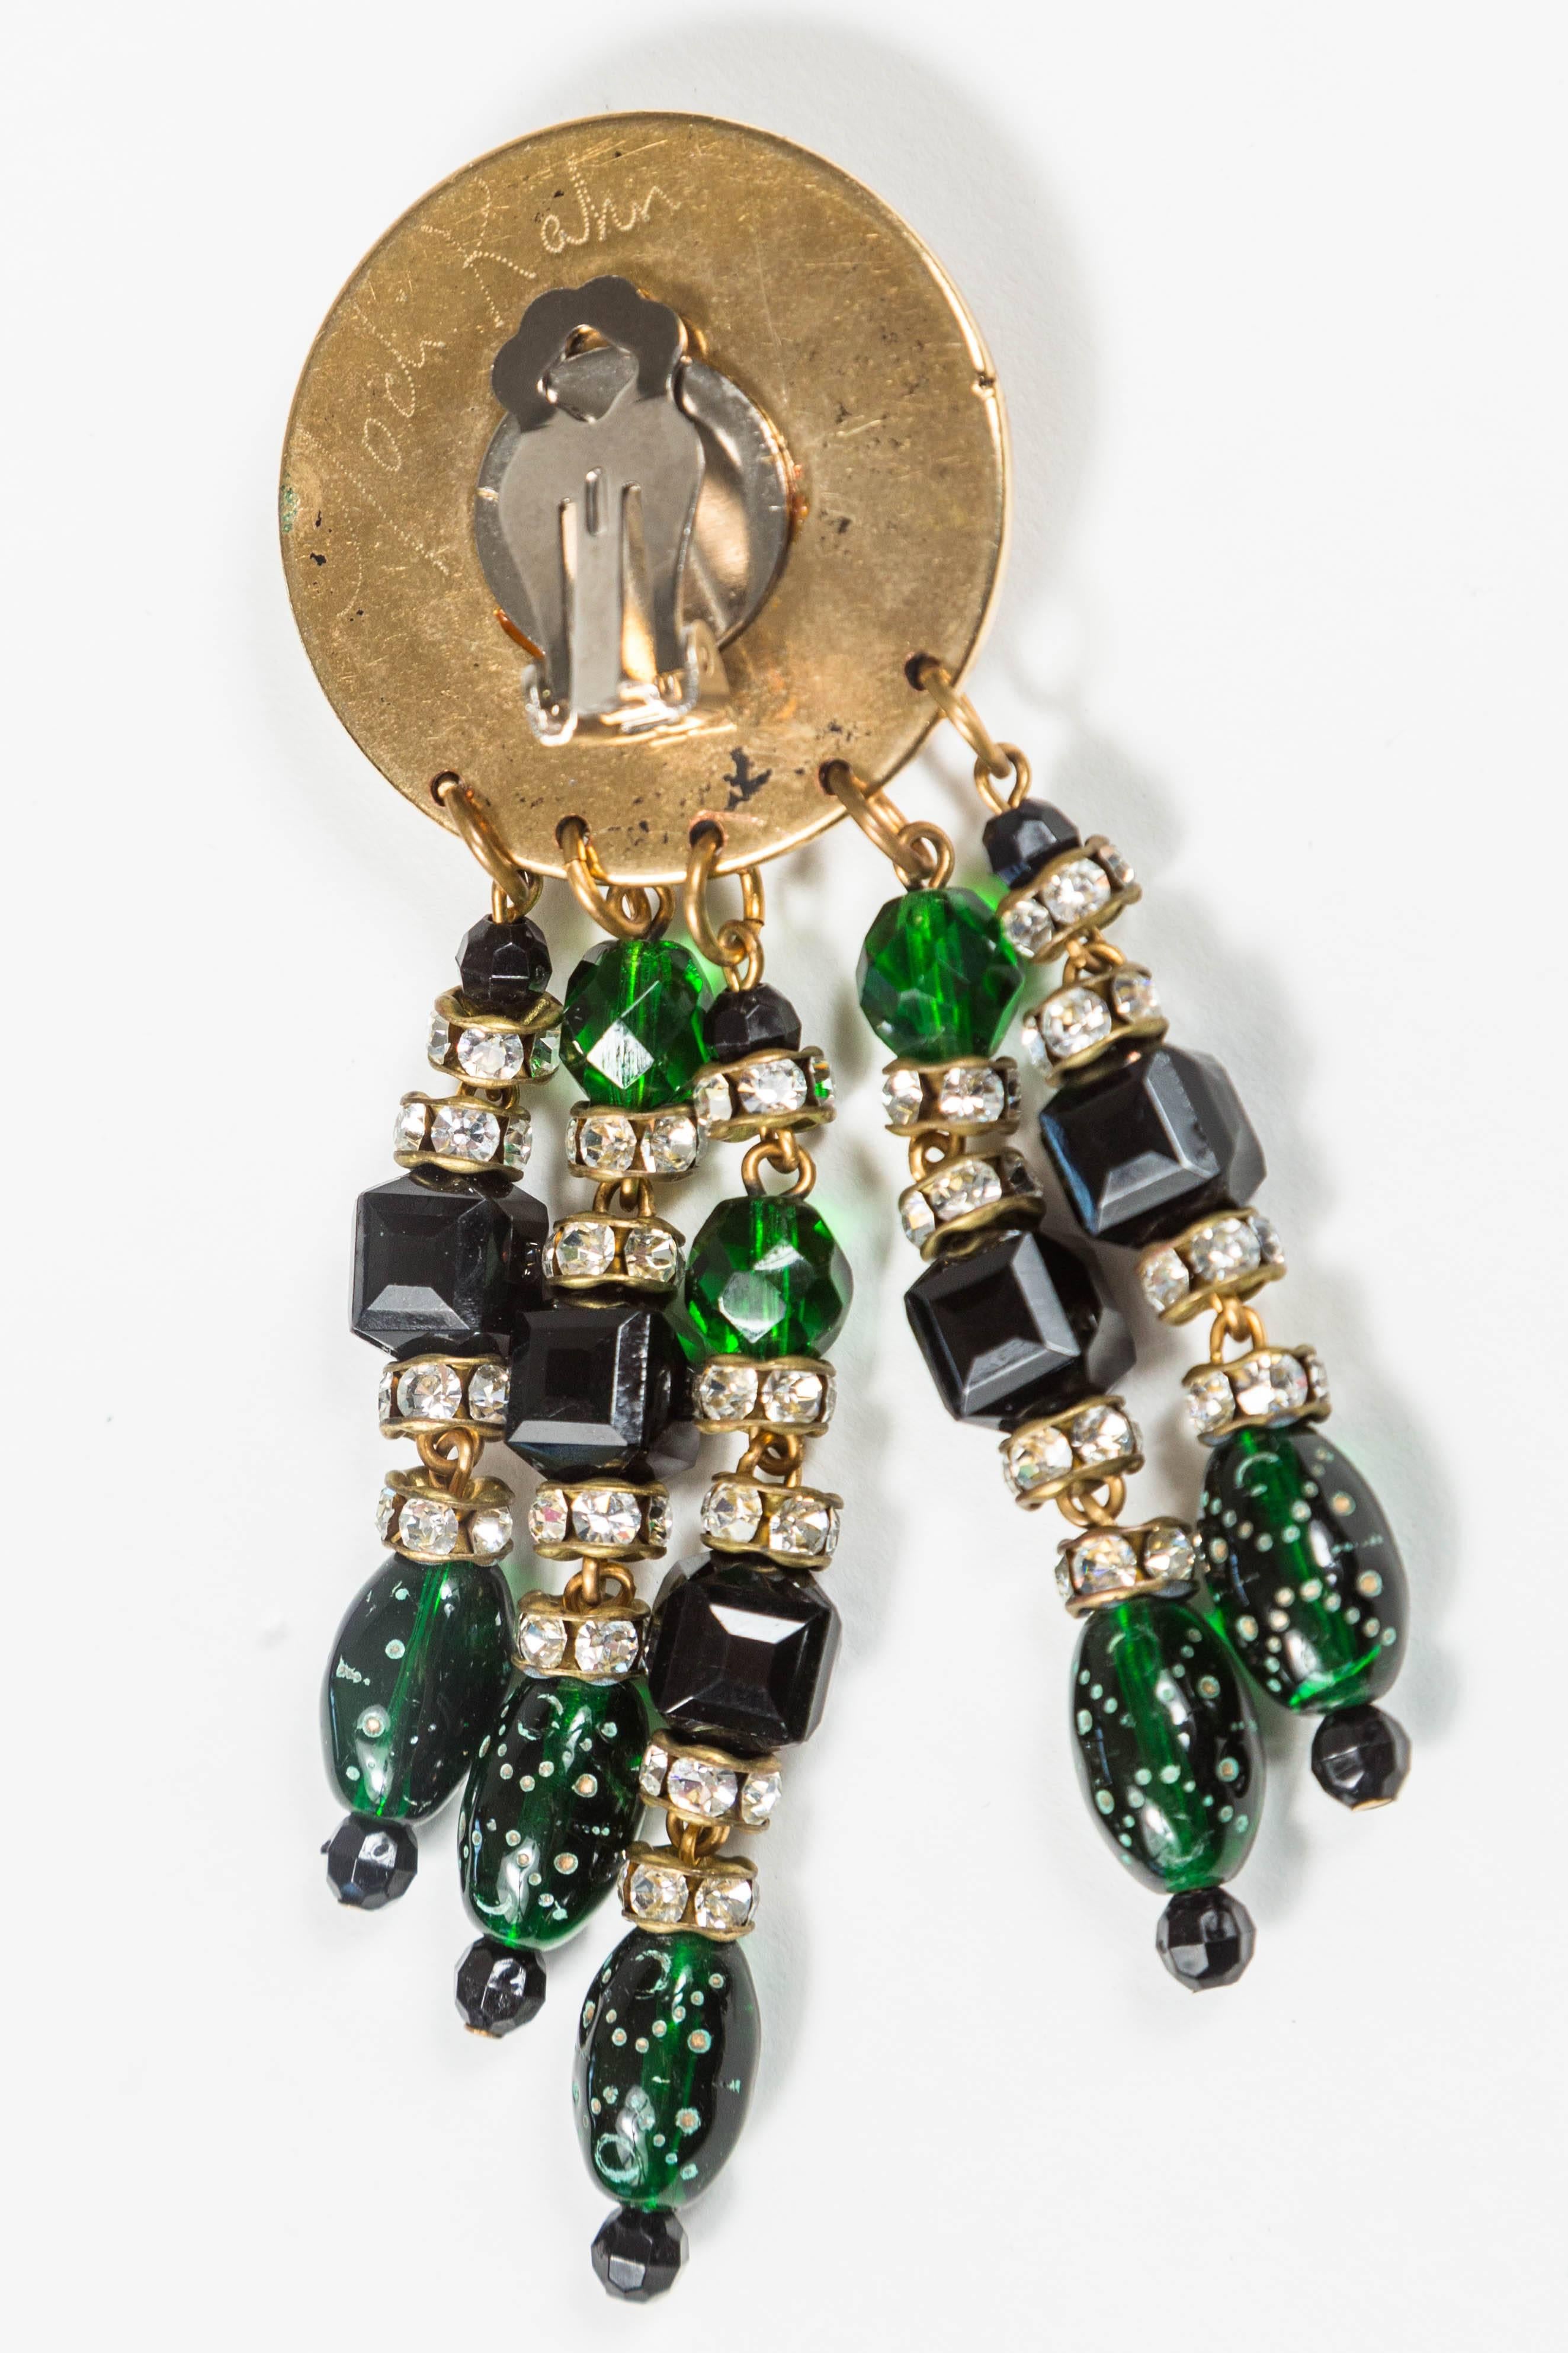 Pair of bewitching costume ear clips by Jodi Kahn. Each with a black center stone surrounded in rhinestones on a gilt pendant, with green and rhinestone beaded drops. Signed Jodi Kahn on the reverse. The ear clip 1 1/4 inches in diameter. 4 inches